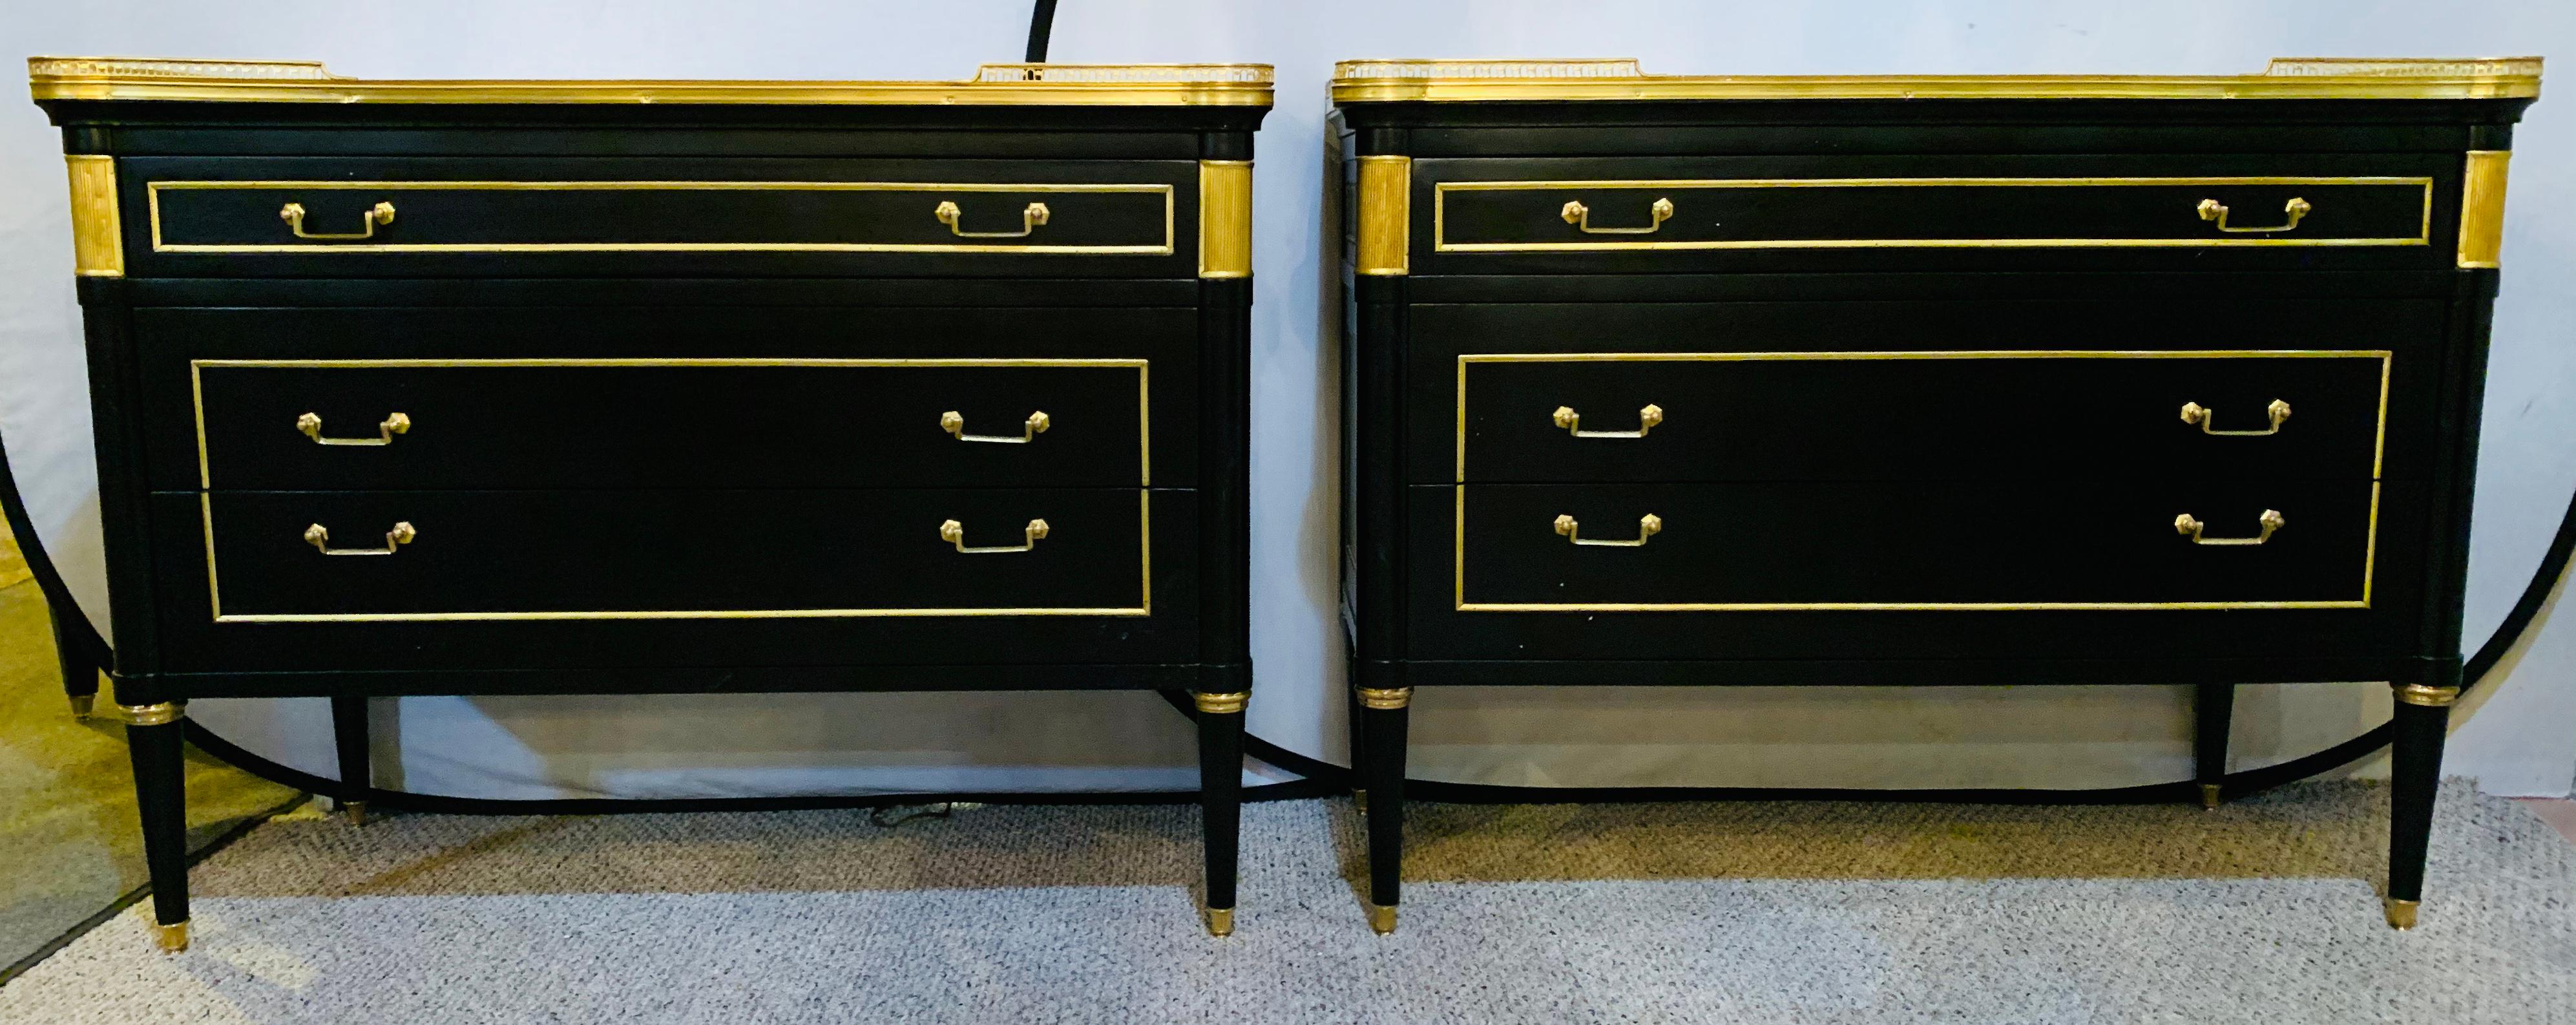 This is a stunning pair of large and impressive ebony bronze mounted commodes, nightstands or sideboards in the manner of Maison Jansen that have all the earmarks of the original item by this iconic designer. The case supporting a white and gray